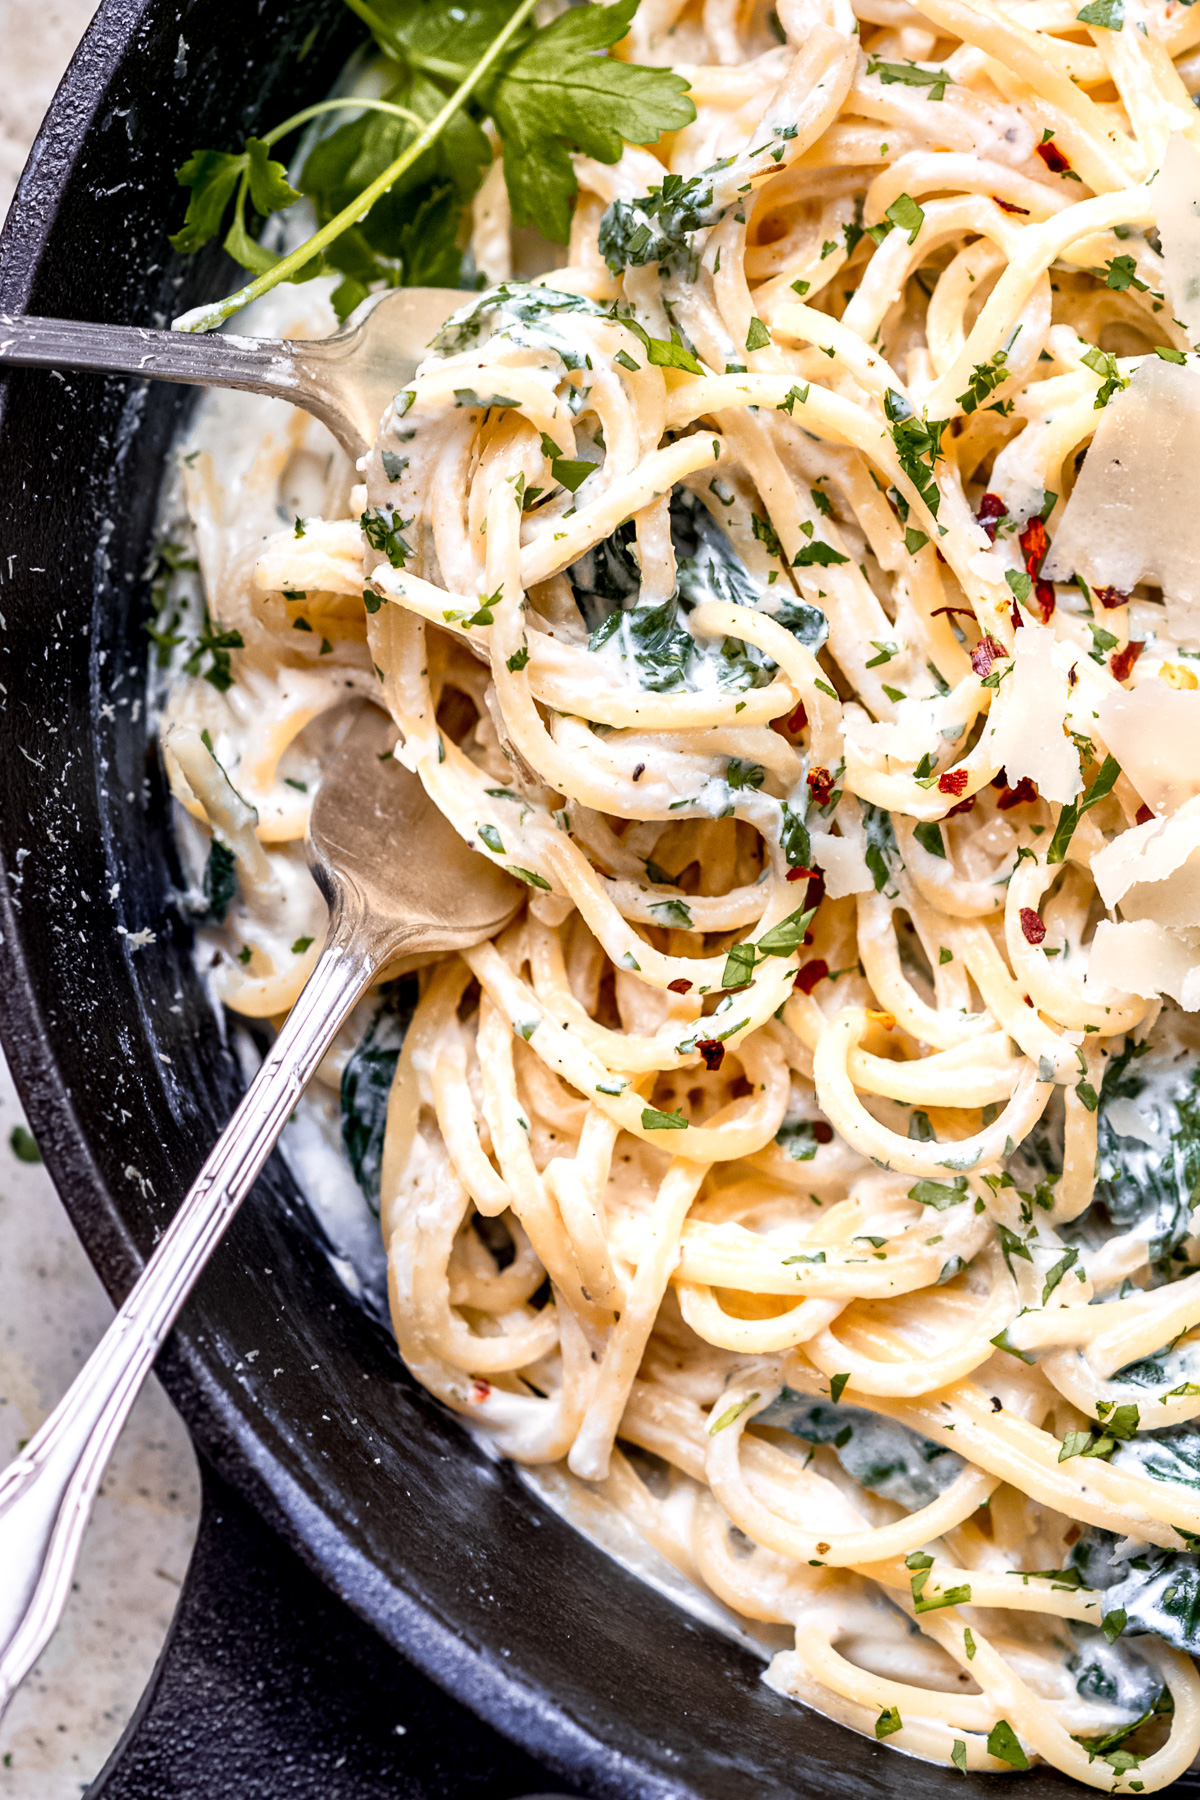 Spinach and ricotta pasta with parmesan.